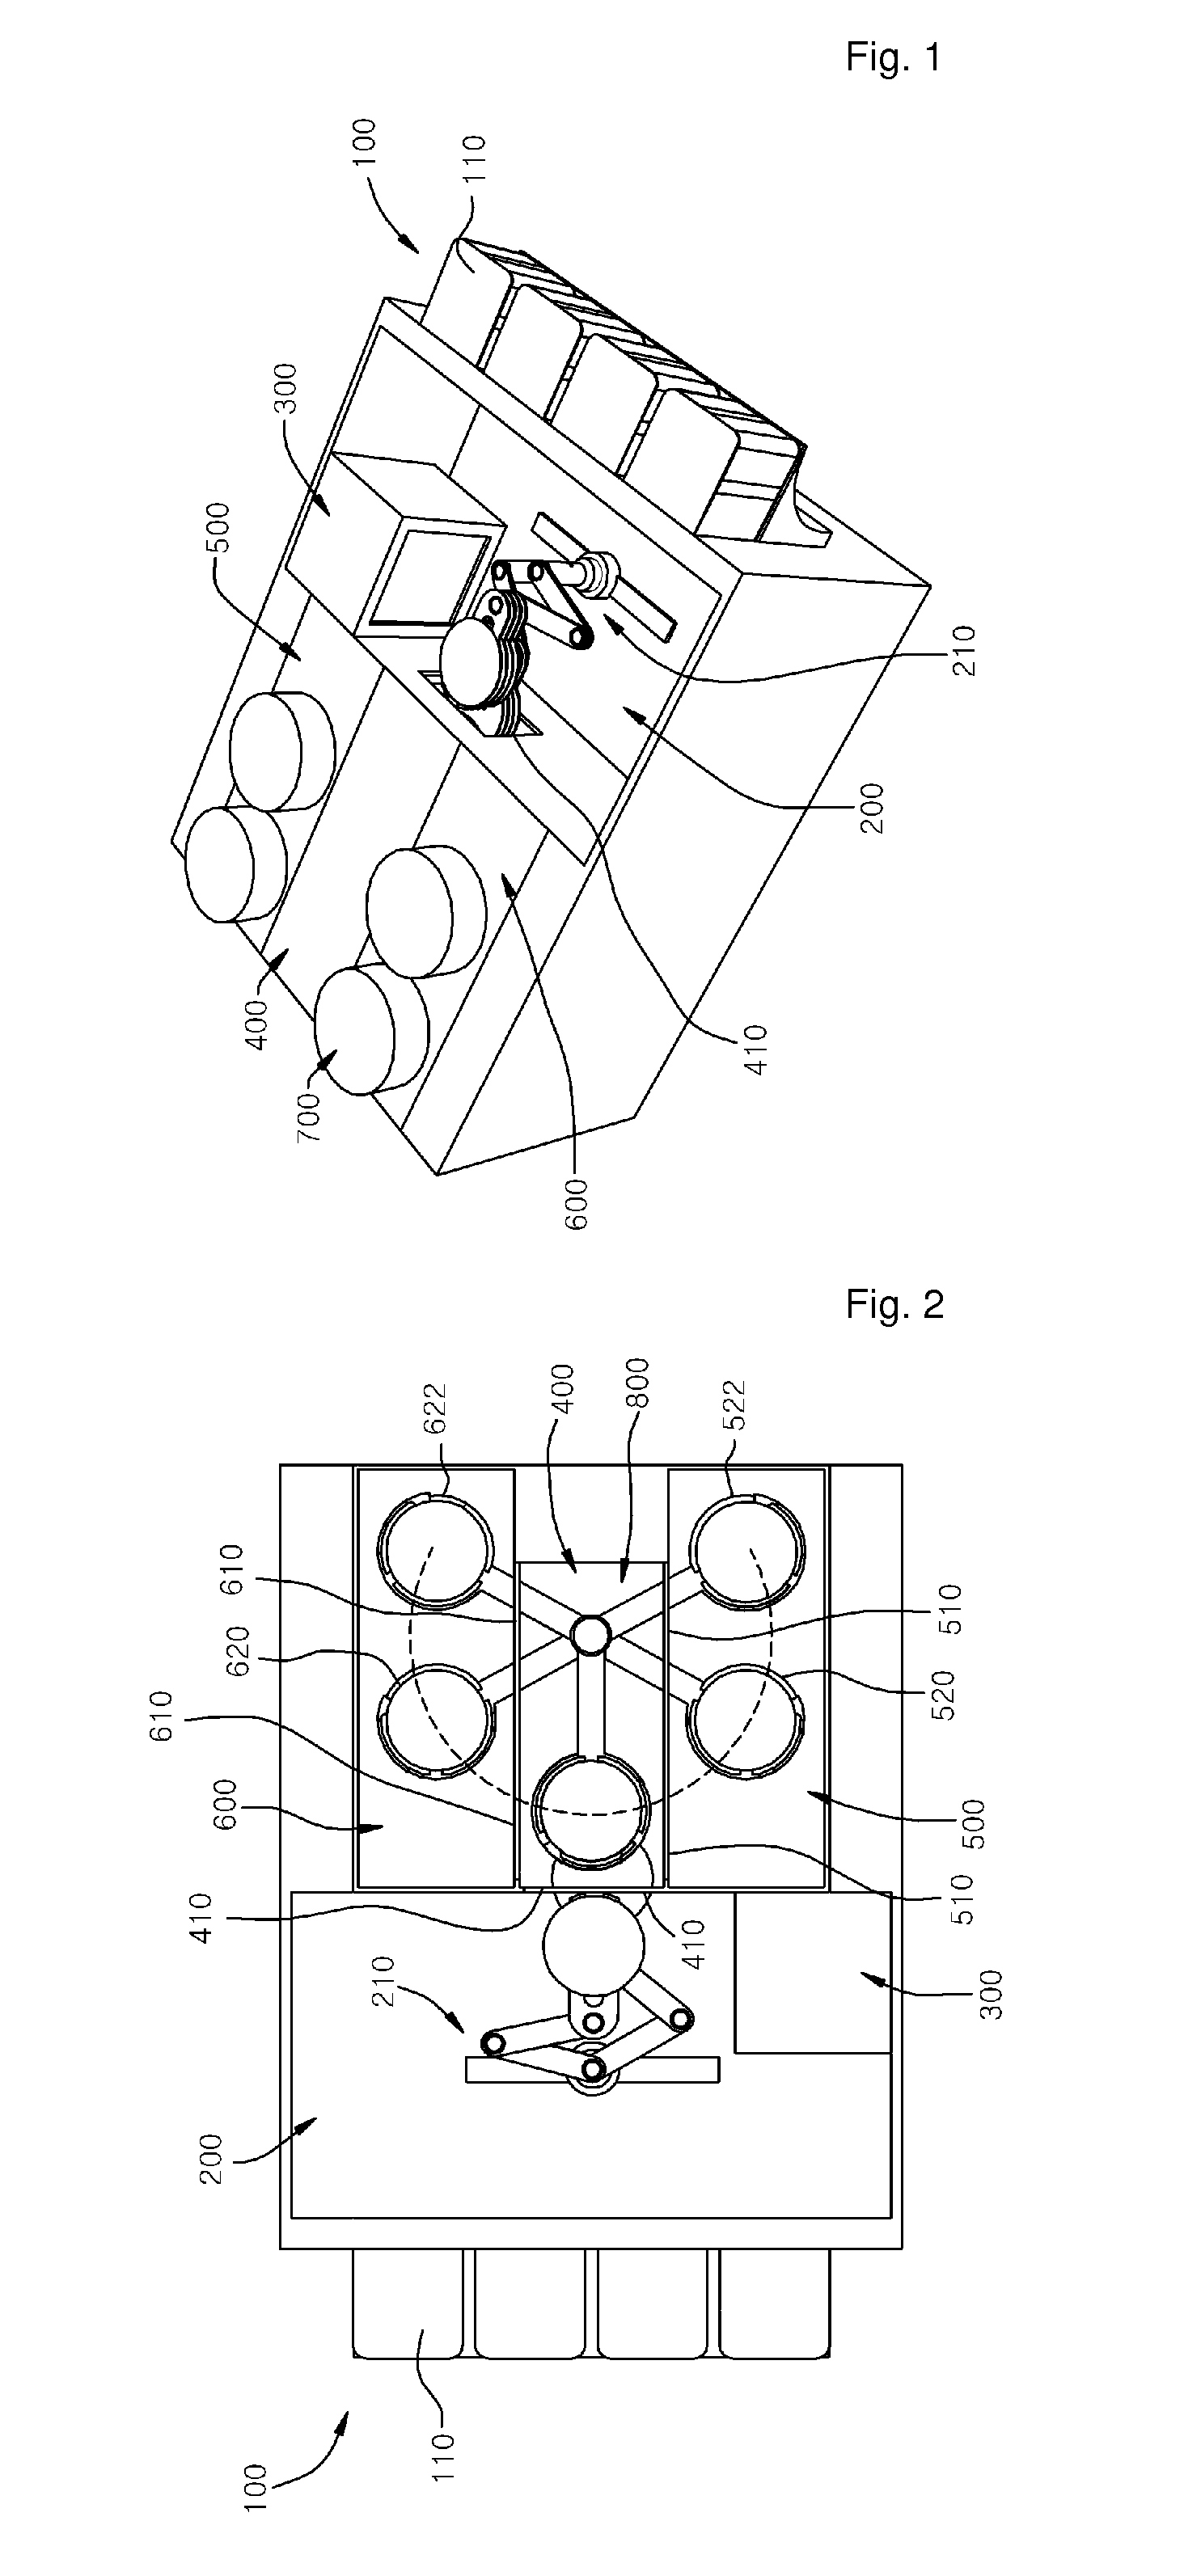 Substrate transfer equipment and high speed substrate processing system using the same